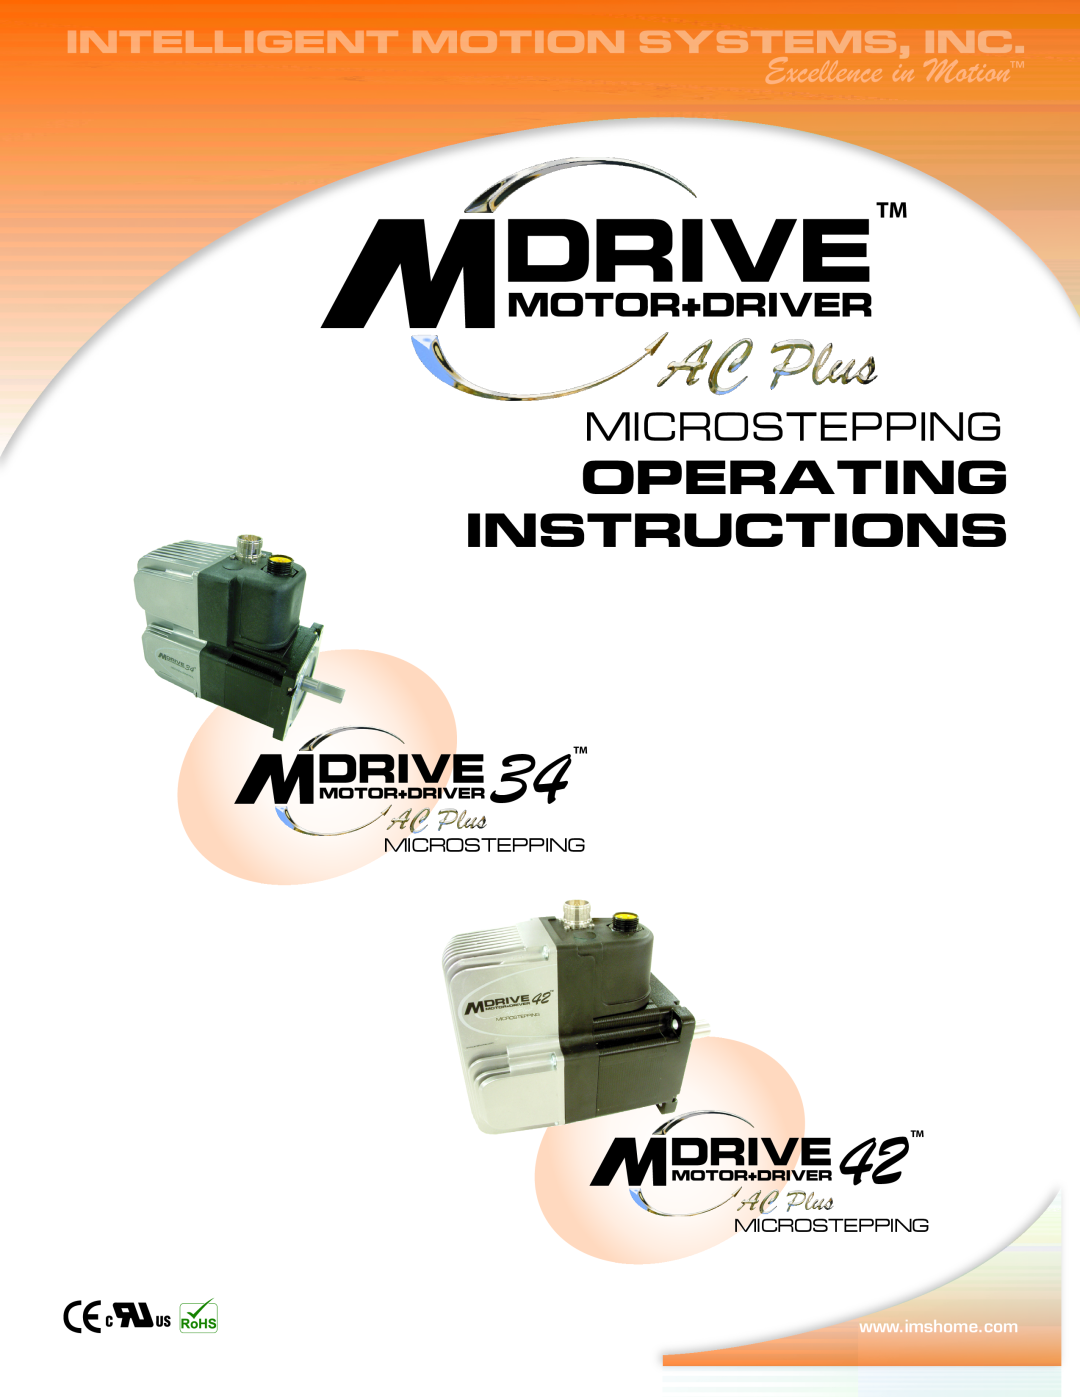 Intelligent Motion Systems MDrive34AC manual Excellence in MotionTM, 34 TM, 42TM, Operating Instructions, mICROSTEPPING 